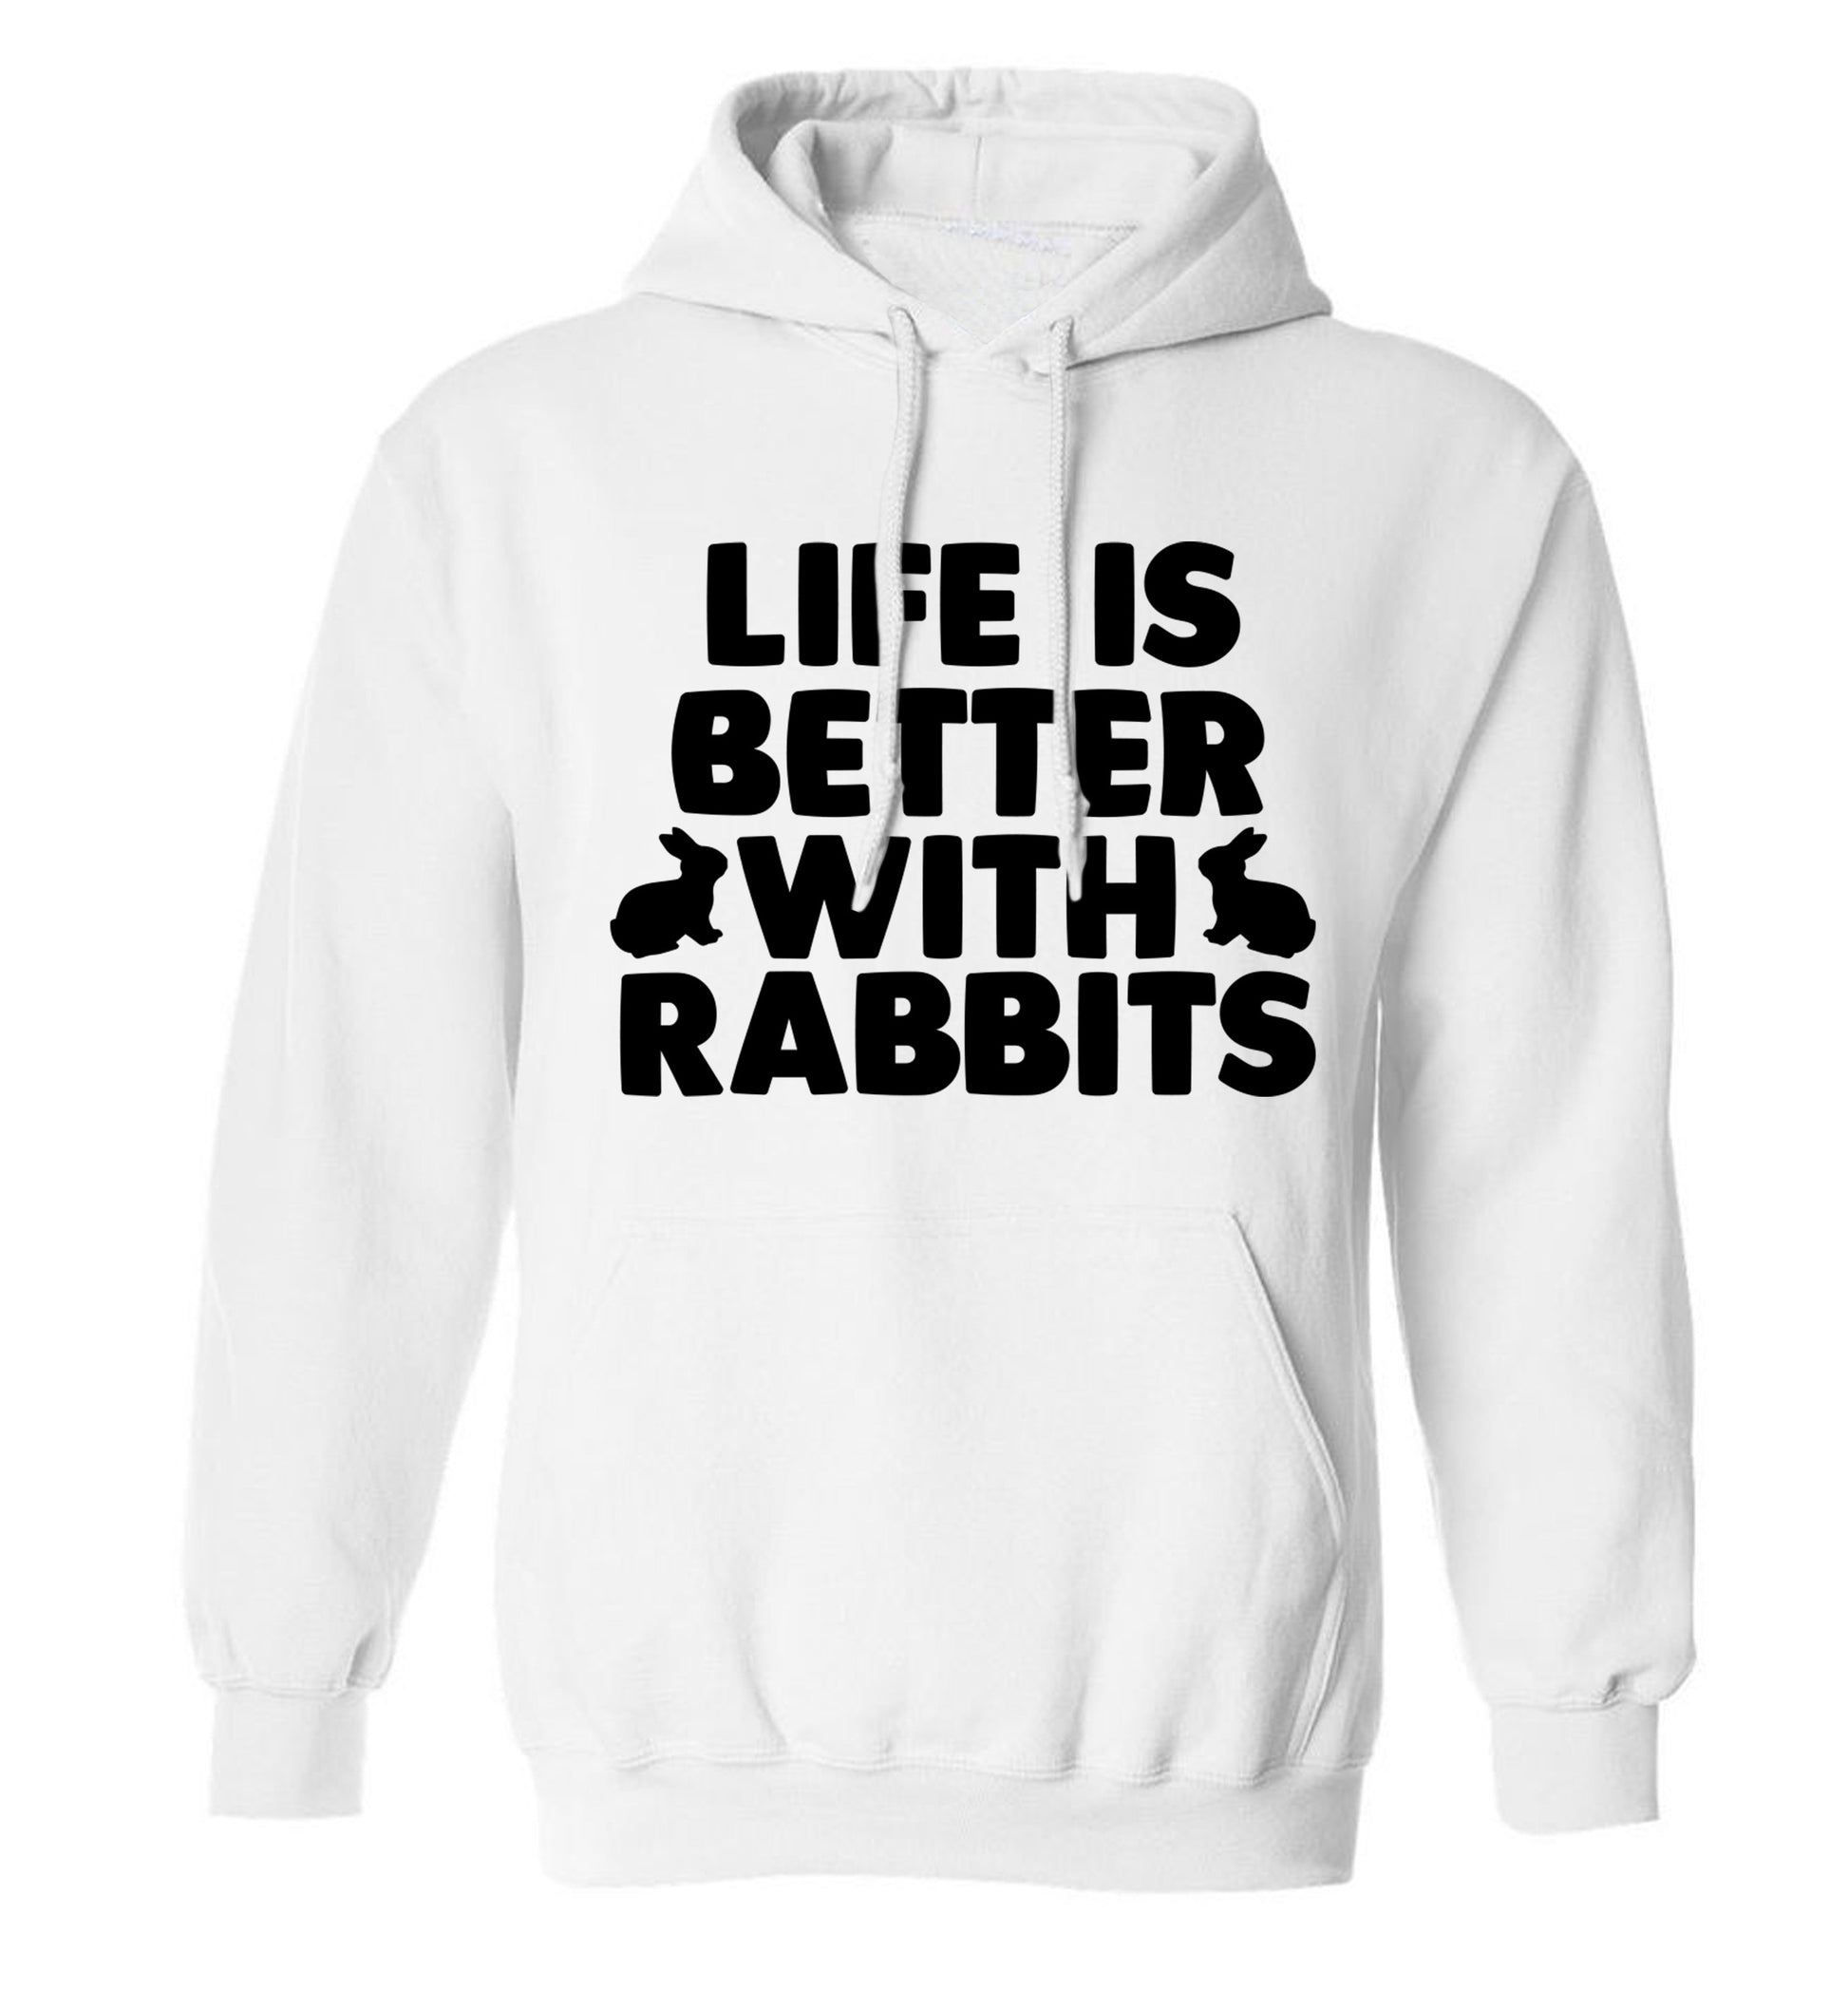 Life is better with rabbits adults unisex white hoodie 2XL